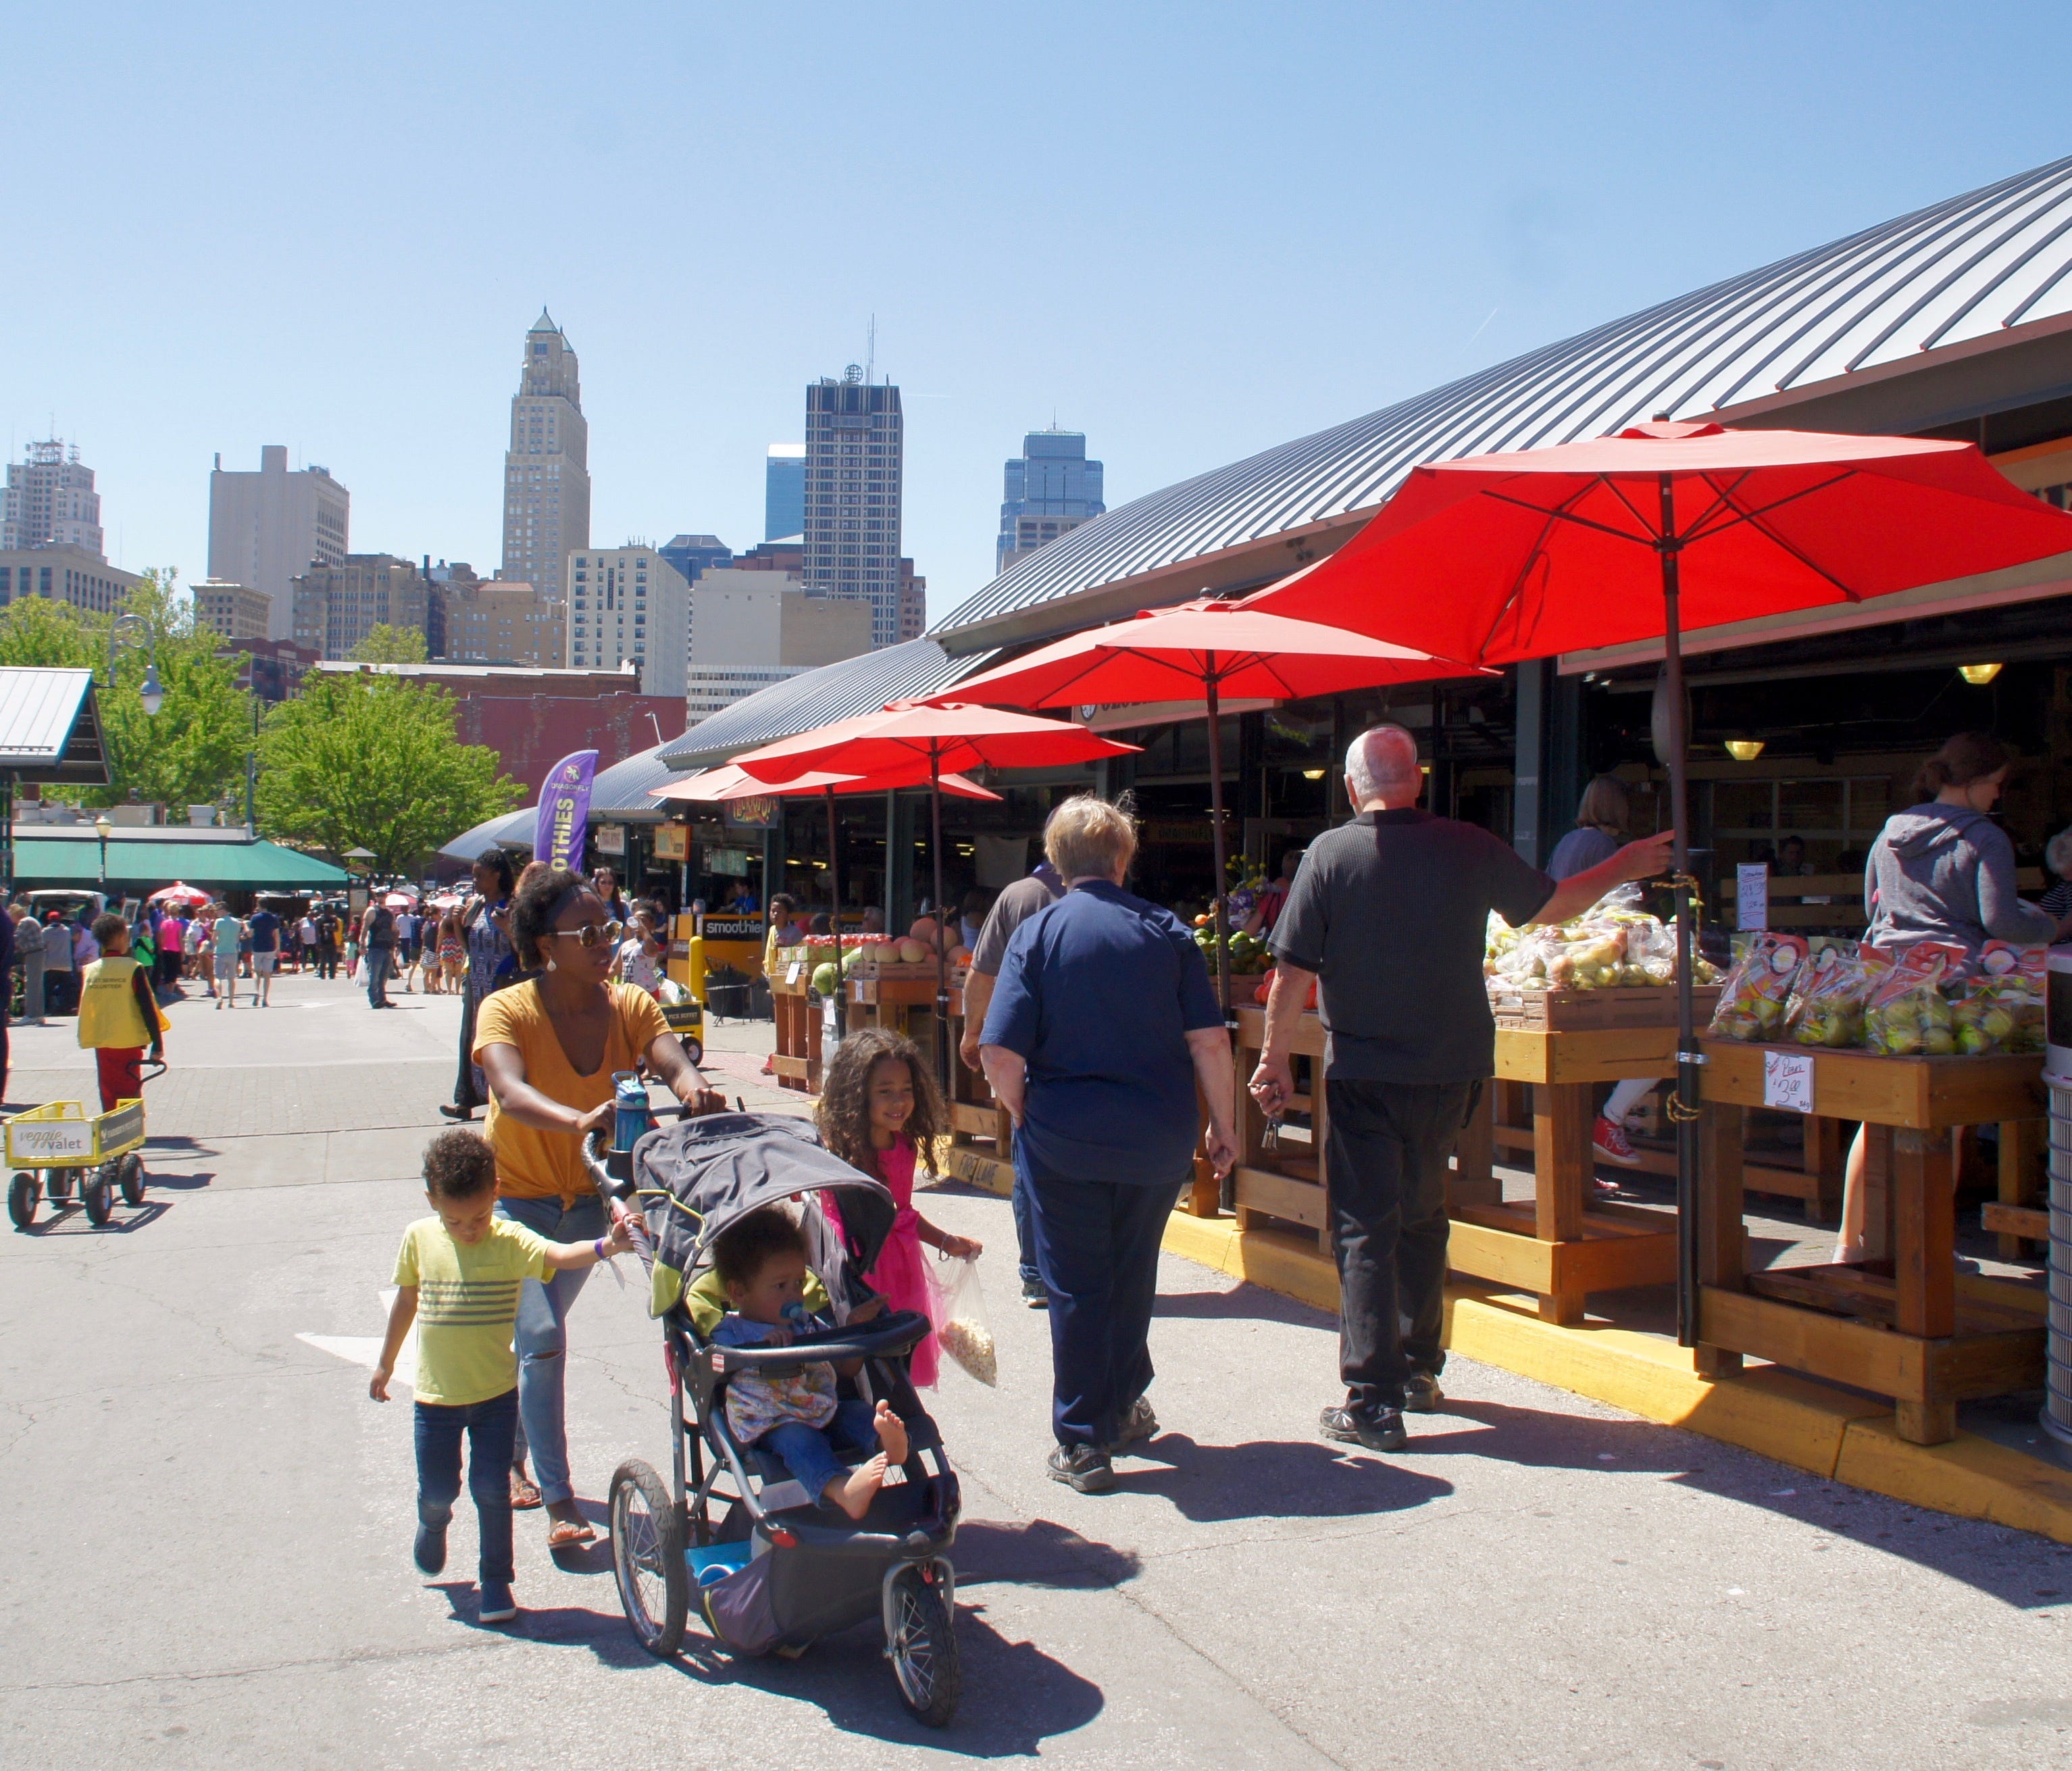 City Market resides on 11 acres in the historic River Market neighborhood between downtown Kansas City and the Missouri River.